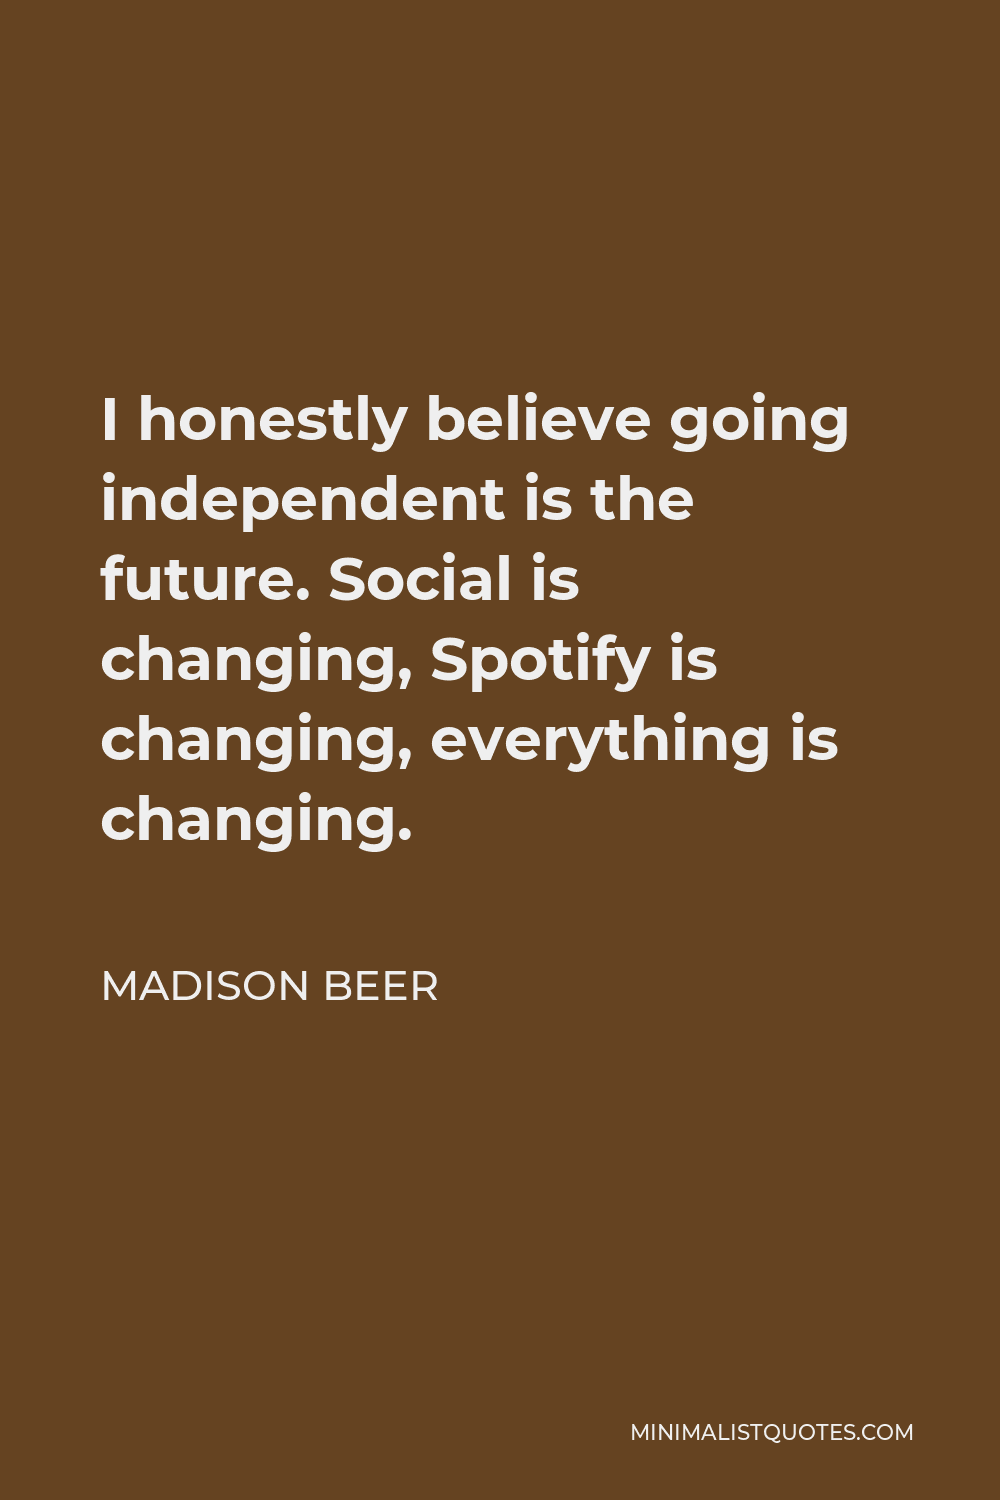 Madison Beer Quote - I honestly believe going independent is the future. Social is changing, Spotify is changing, everything is changing.